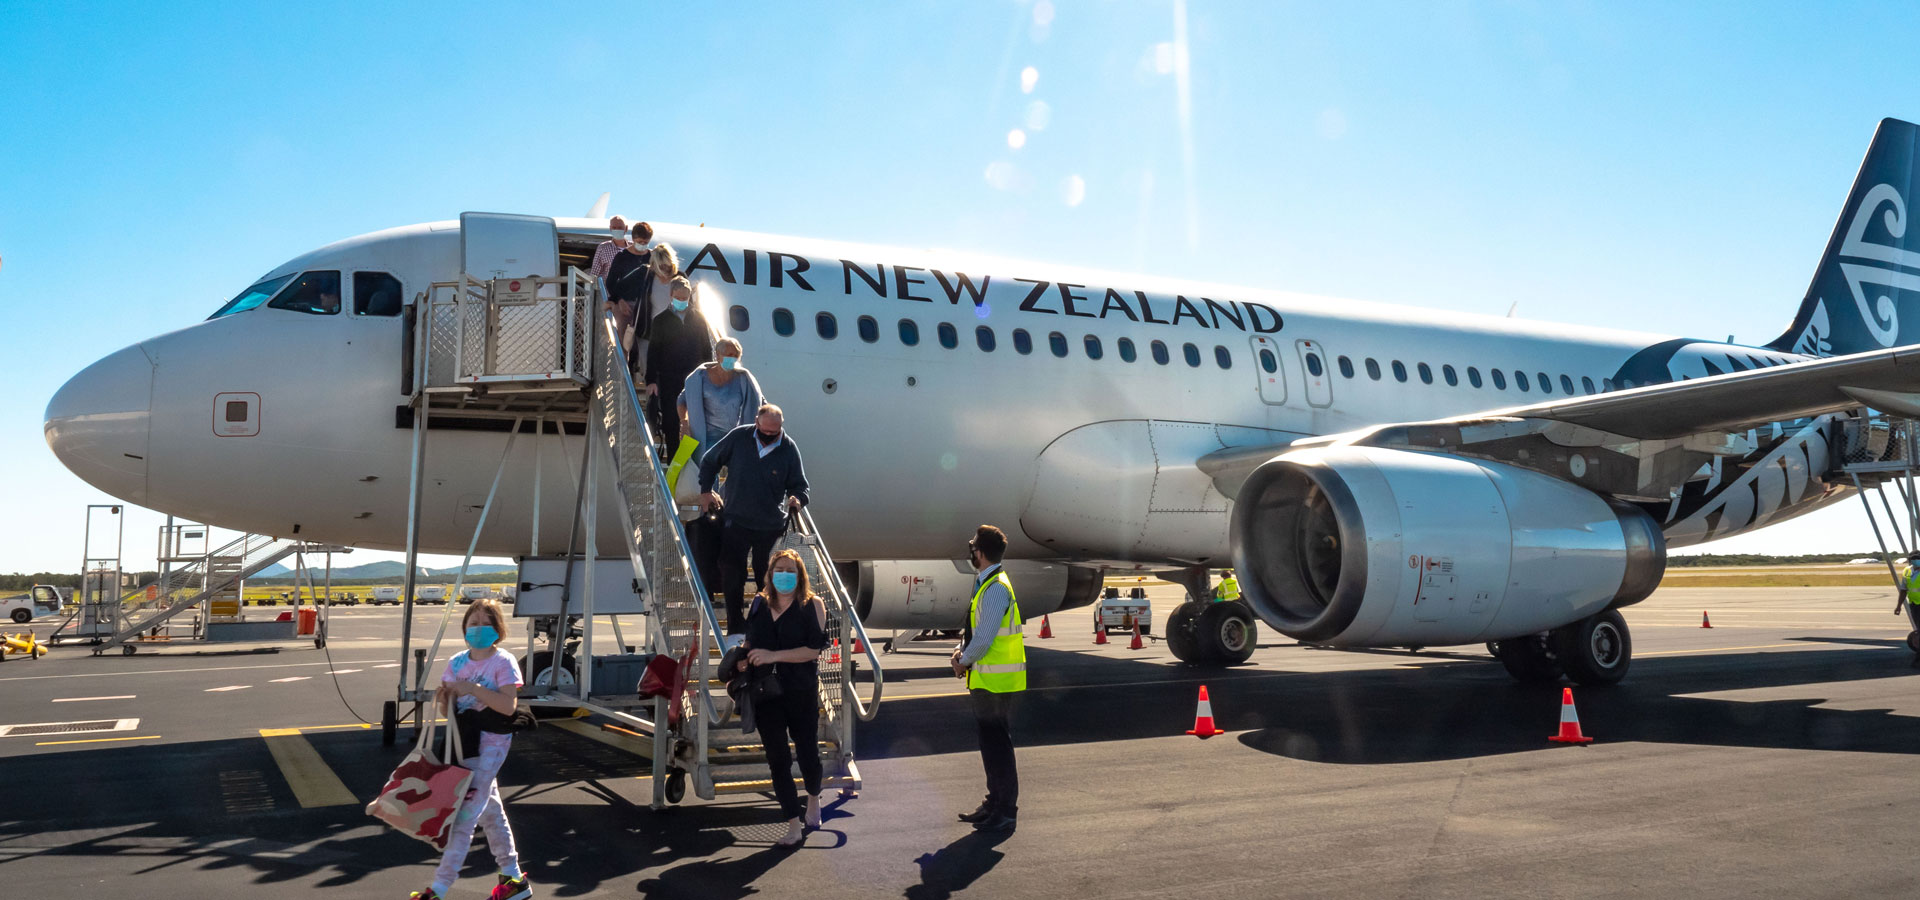 First international flight arrives on Sunshine Coast Airport’s new runway, as Air New Zealand launch year round service to Auckland